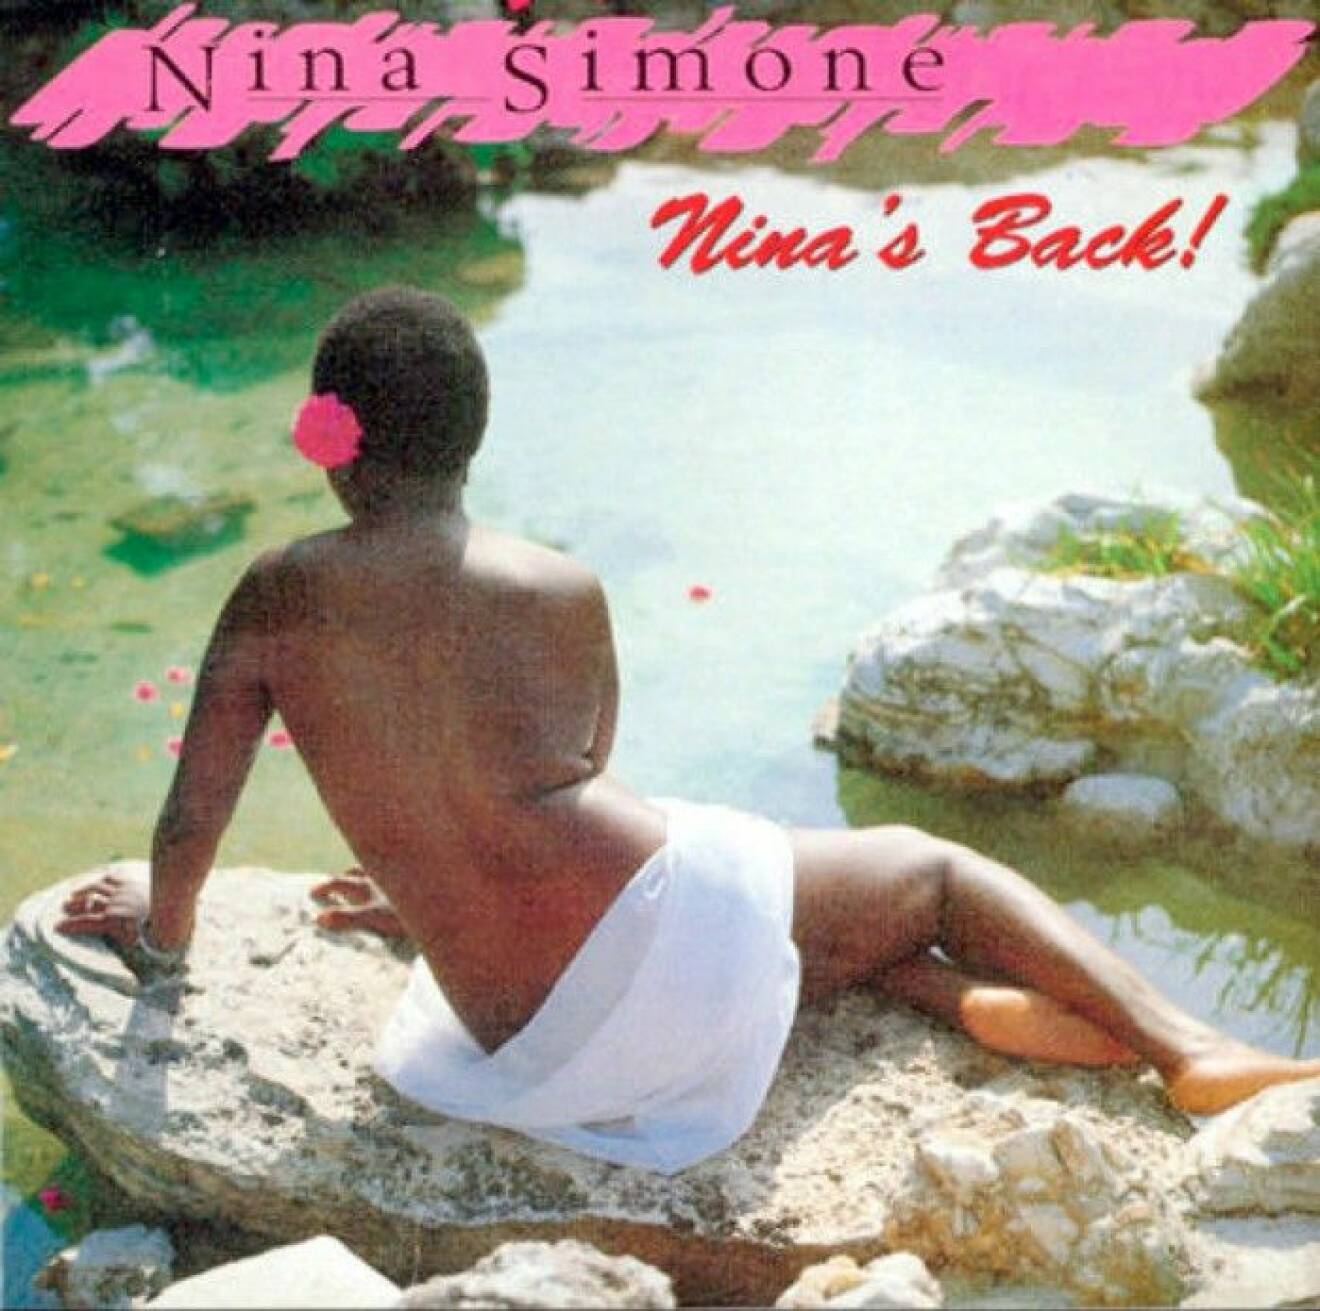 You must have another lover - Nina Simone